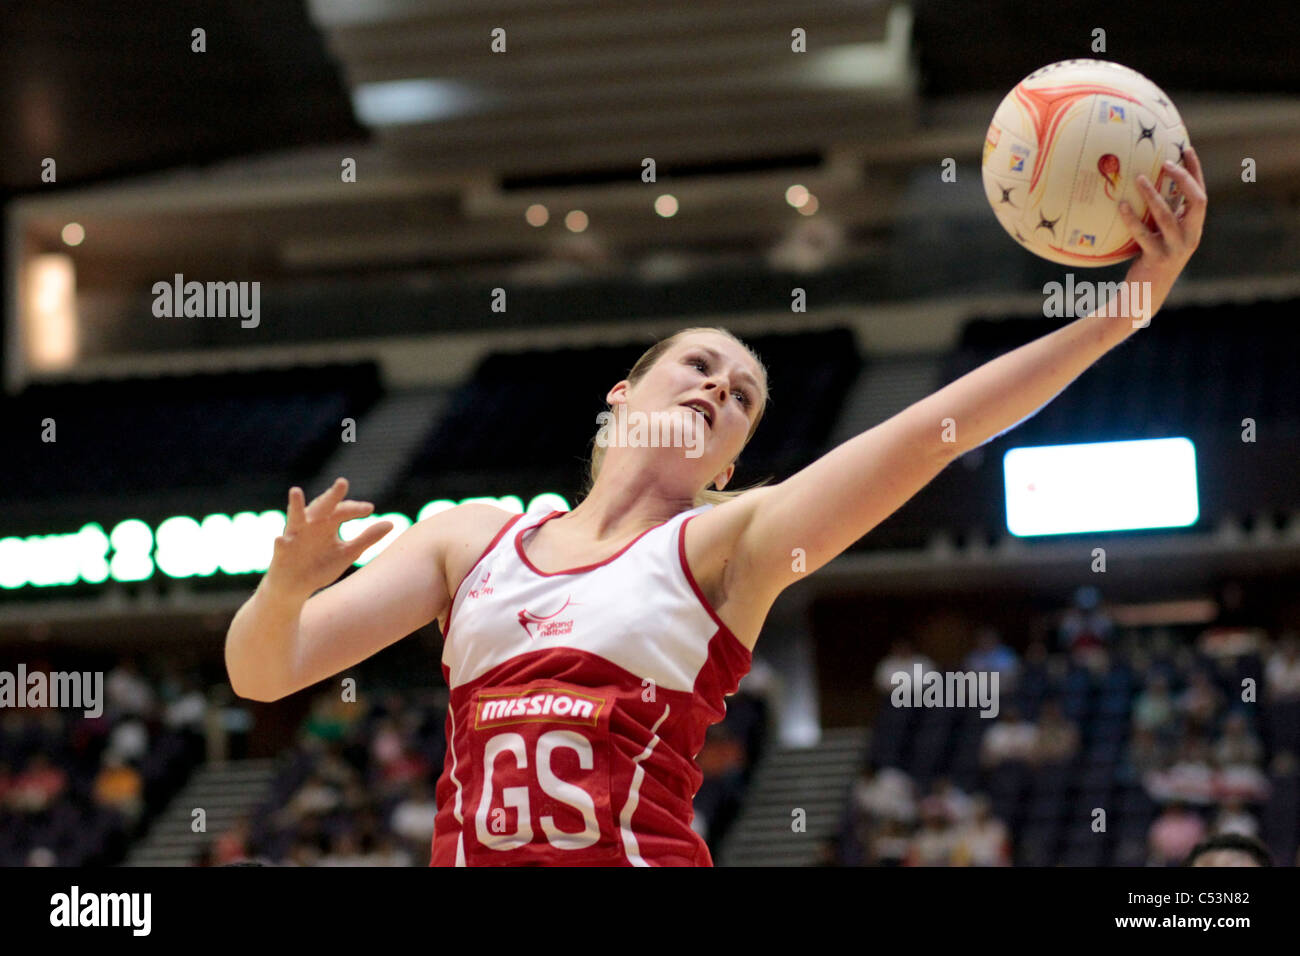 05.07.2011 Louisa Brownfield of England in action during the Pool D match between England and Barbados, Mission Foods World Netball Championships 2011 from the Singapore Indoor Stadium in Singapore. Stock Photo